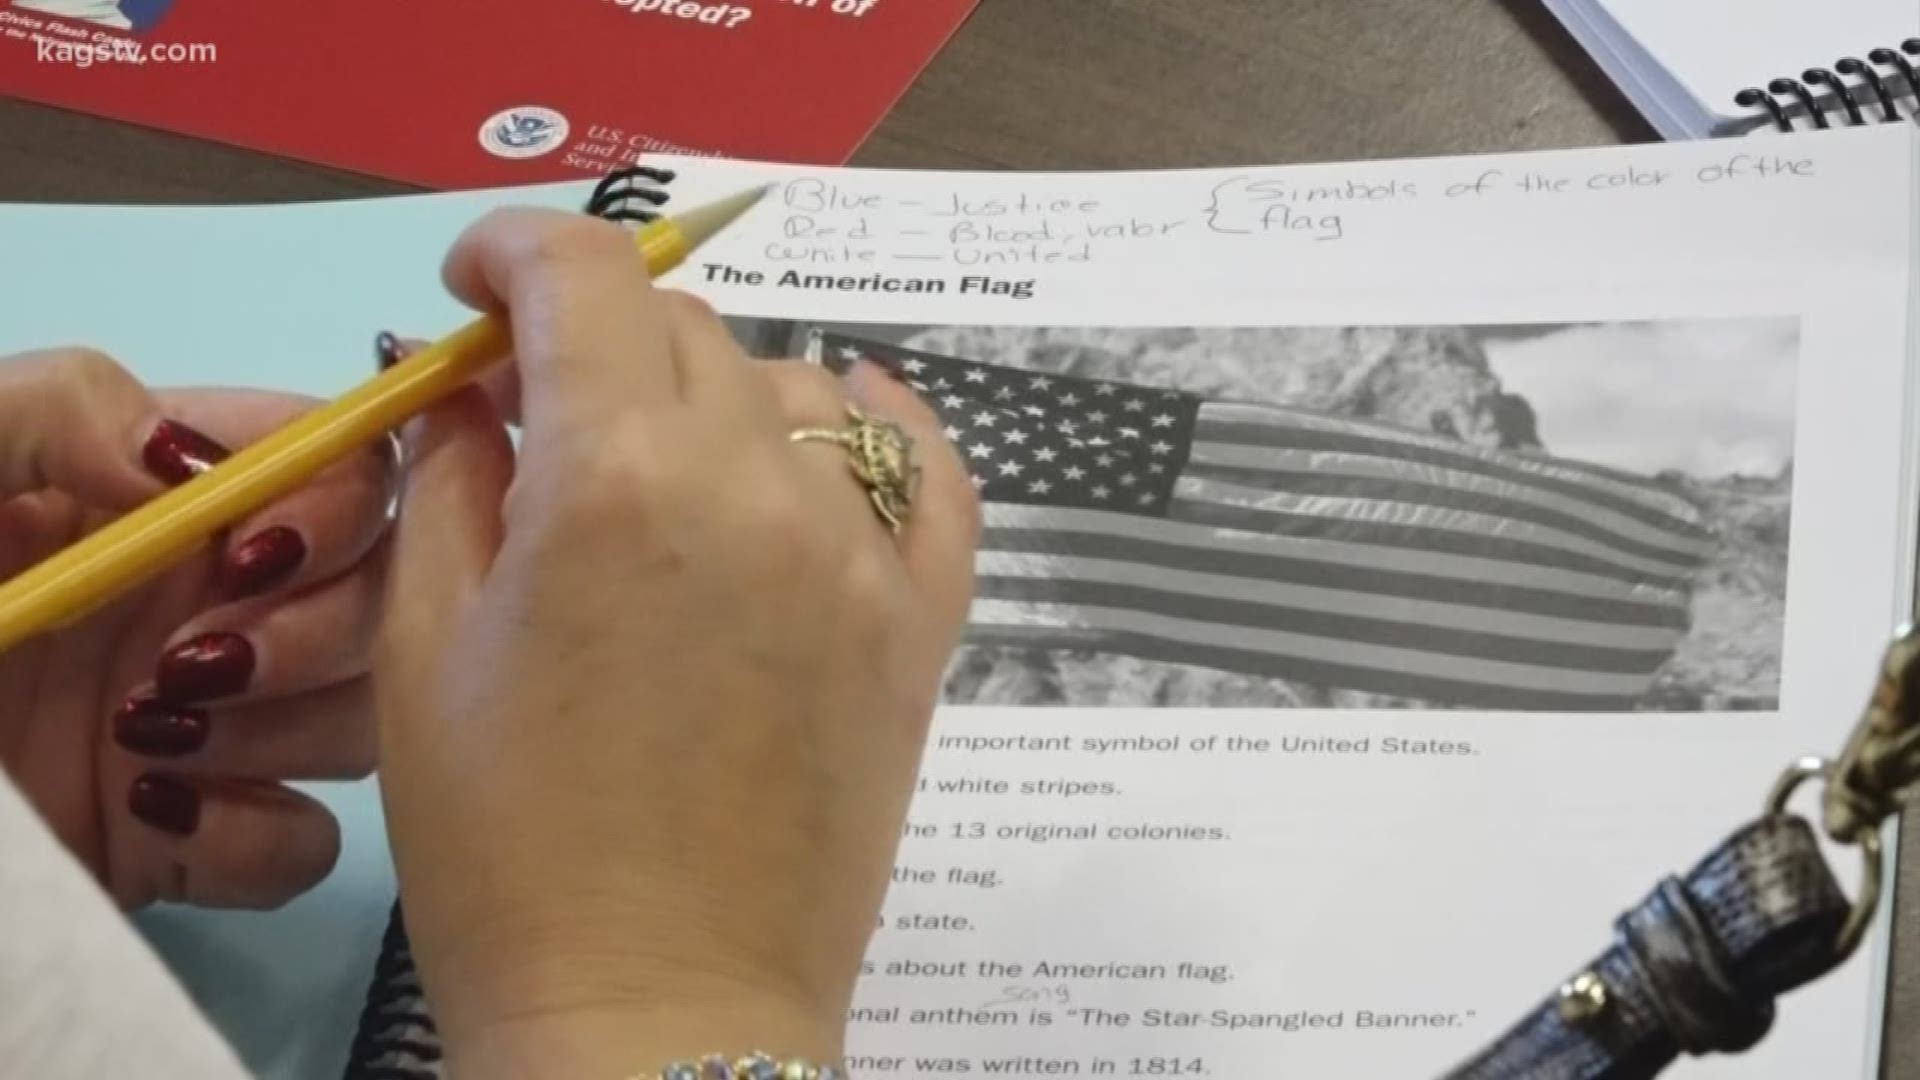 A lot of people think becoming a United States citizen is as easy as taking a class and getting a diploma, but preparing for naturalization is an intricate process.